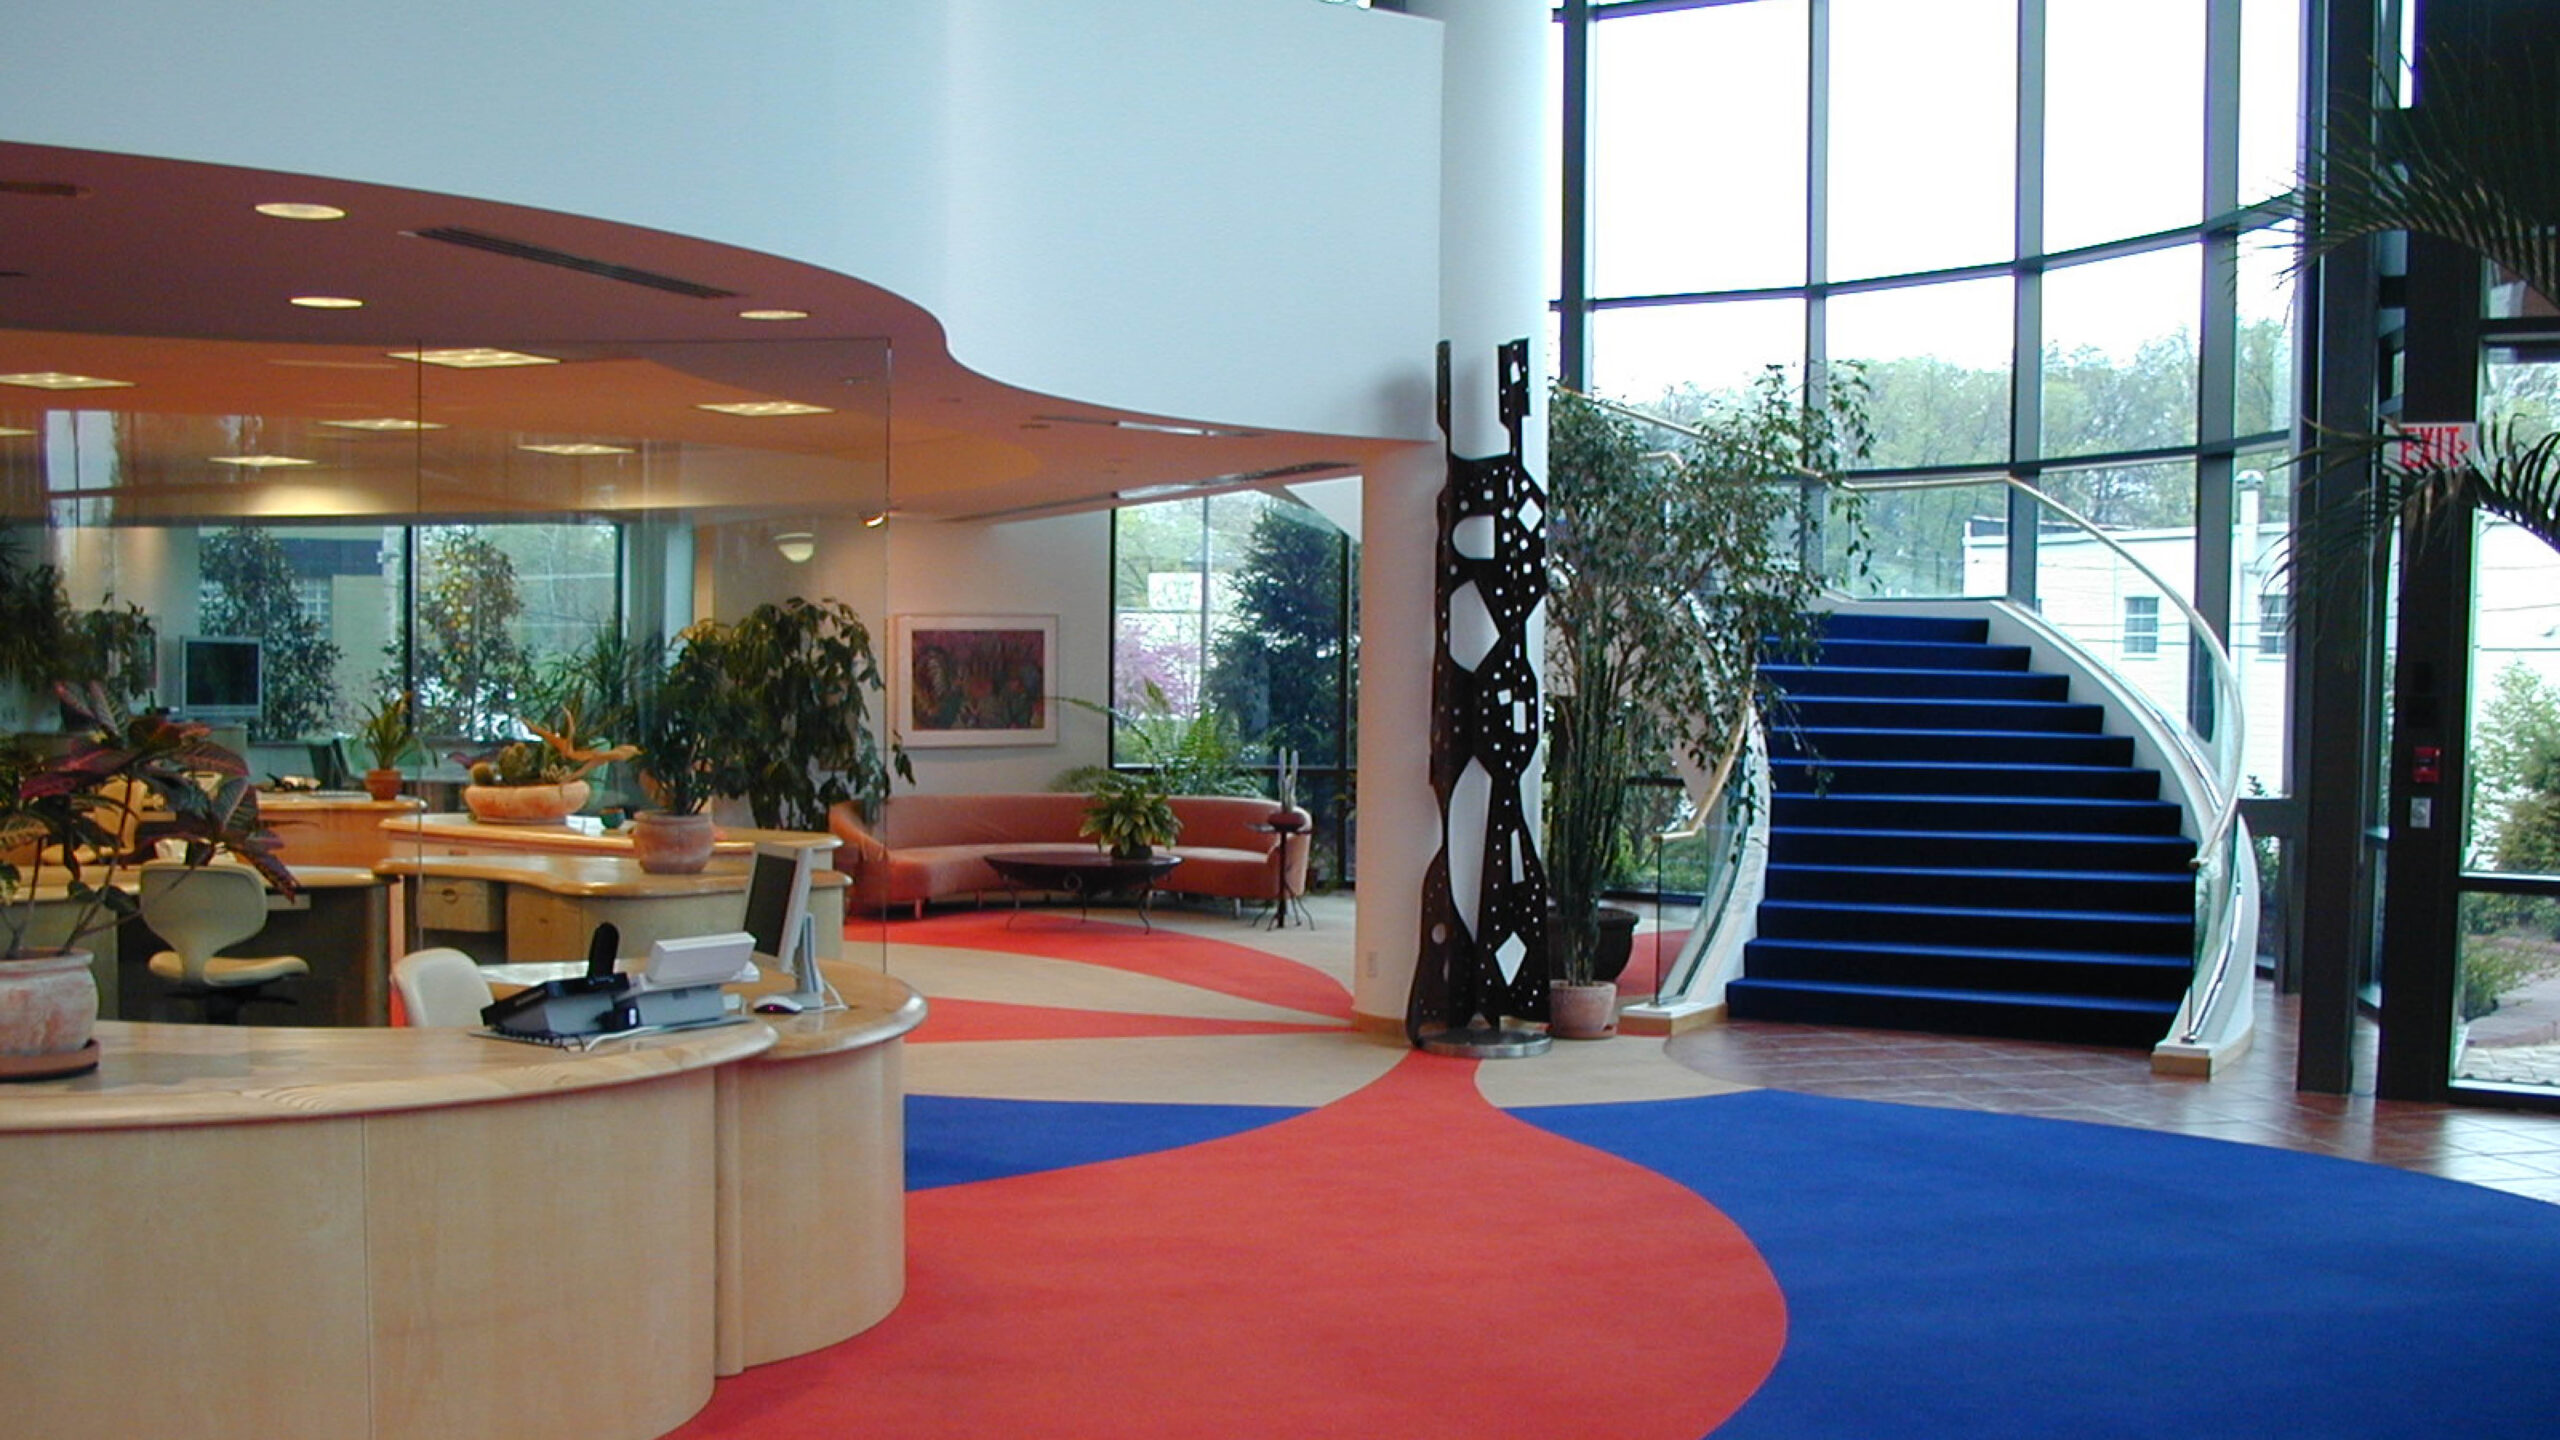 waiting area with reception desk and stairs